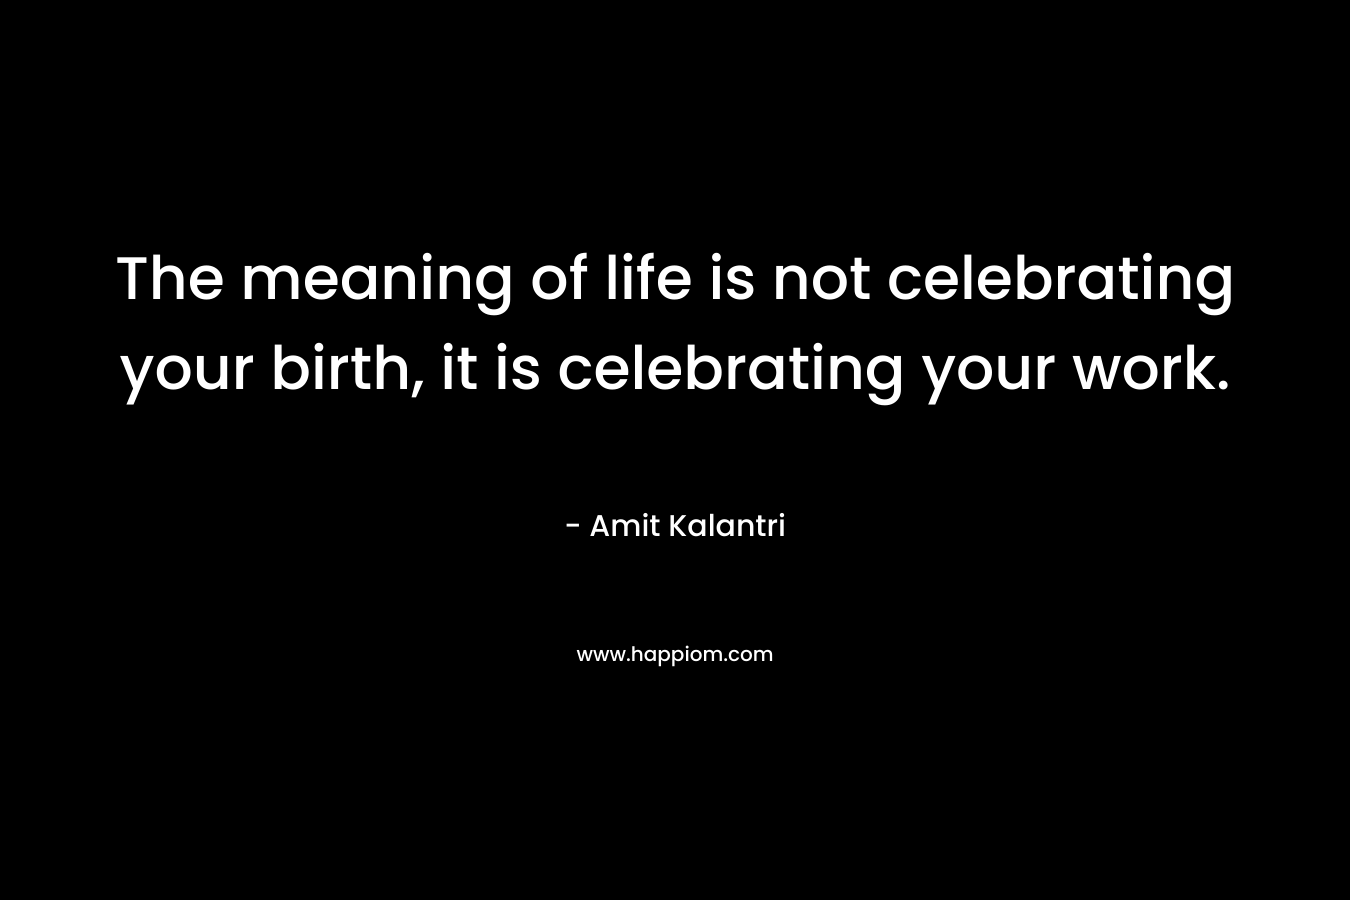 The meaning of life is not celebrating your birth, it is celebrating your work.